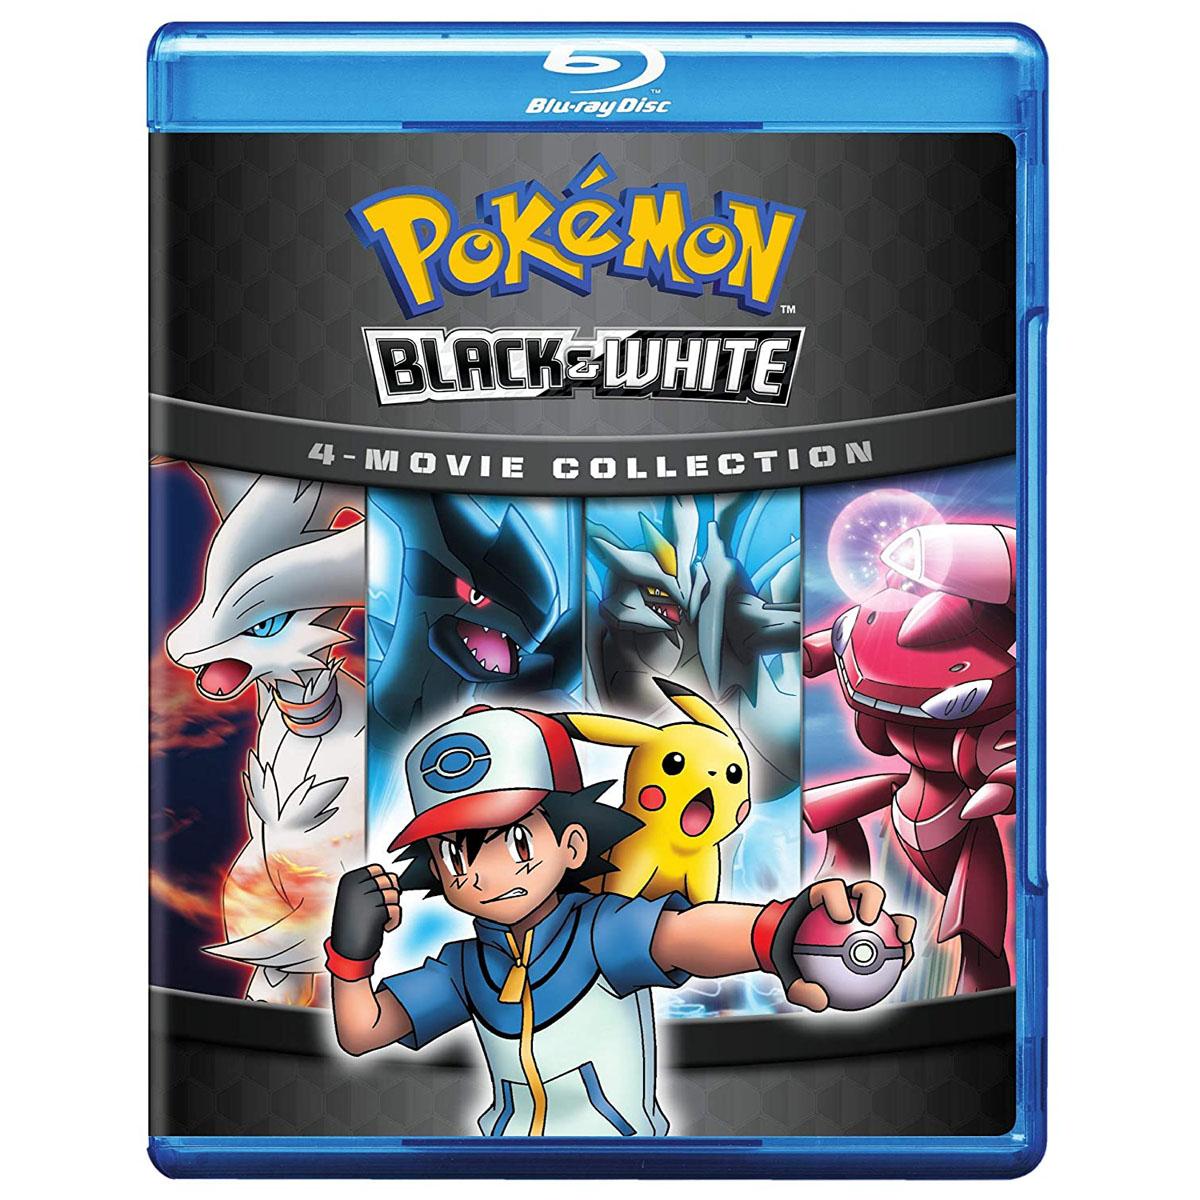 Pokemon Black and White 4-Movie Collection Blu-ray for $9.99